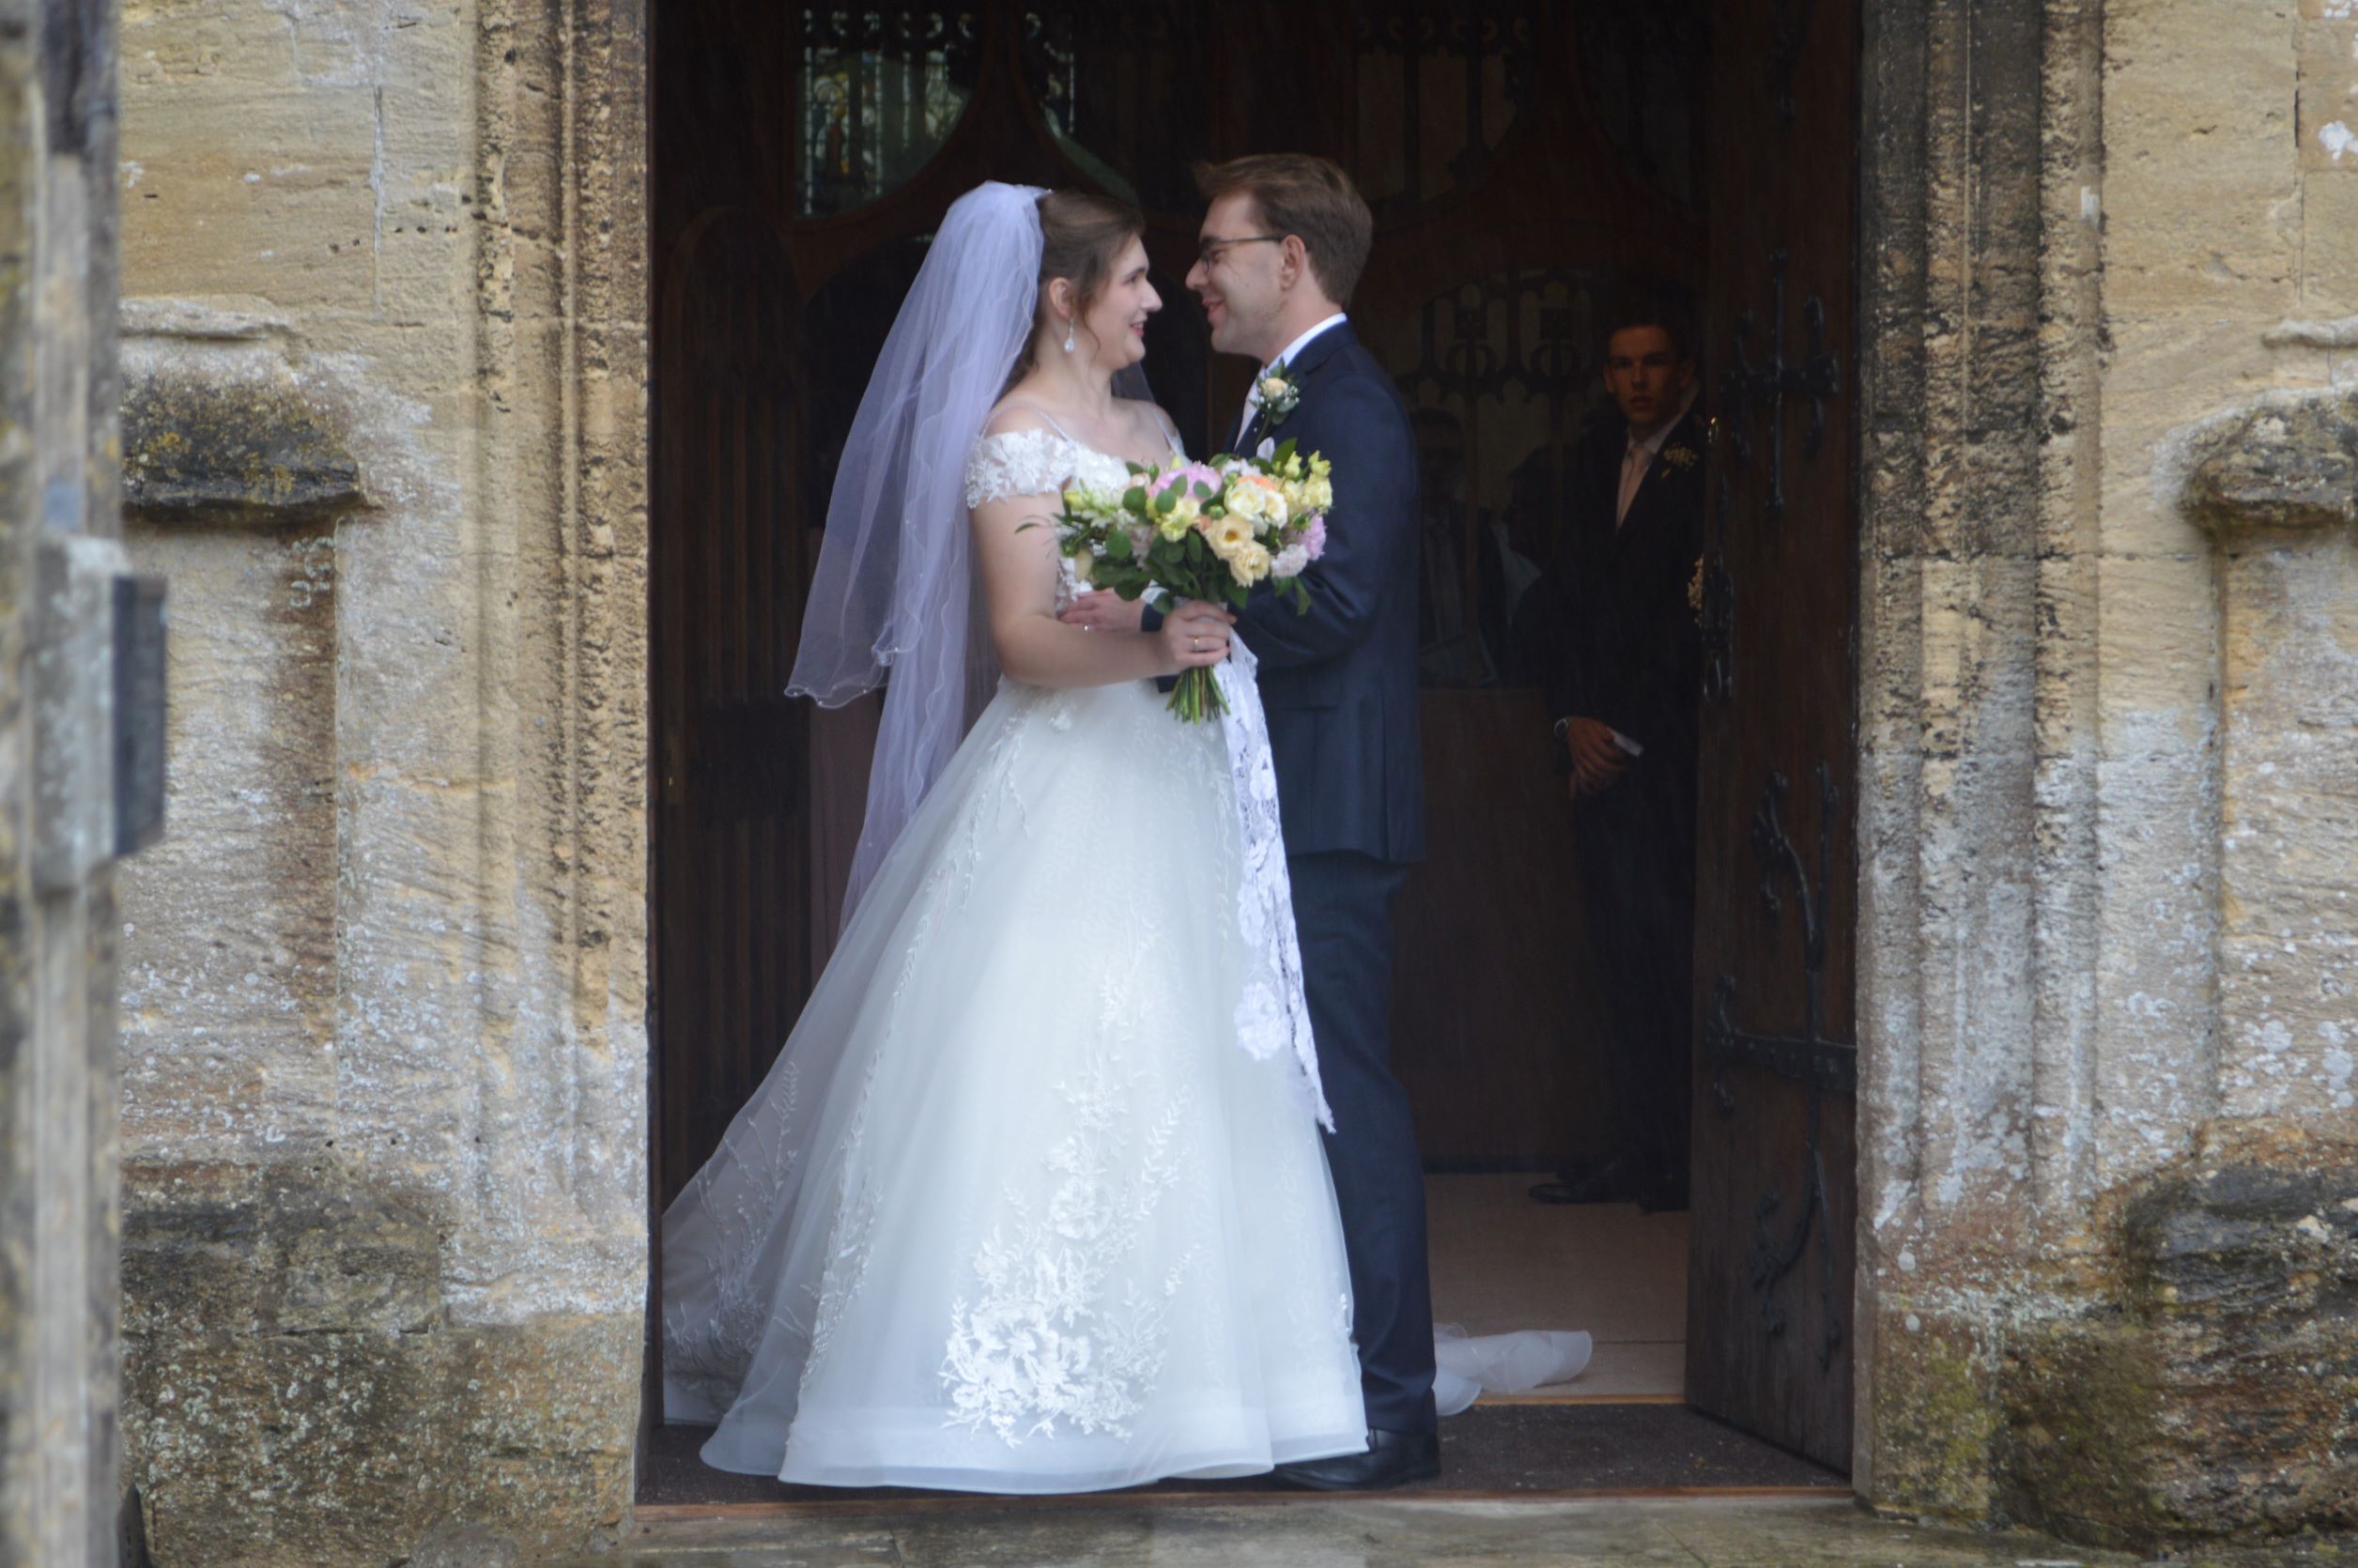 St. Mary's Church wedding for Lilly and Joel 2nd July 2022